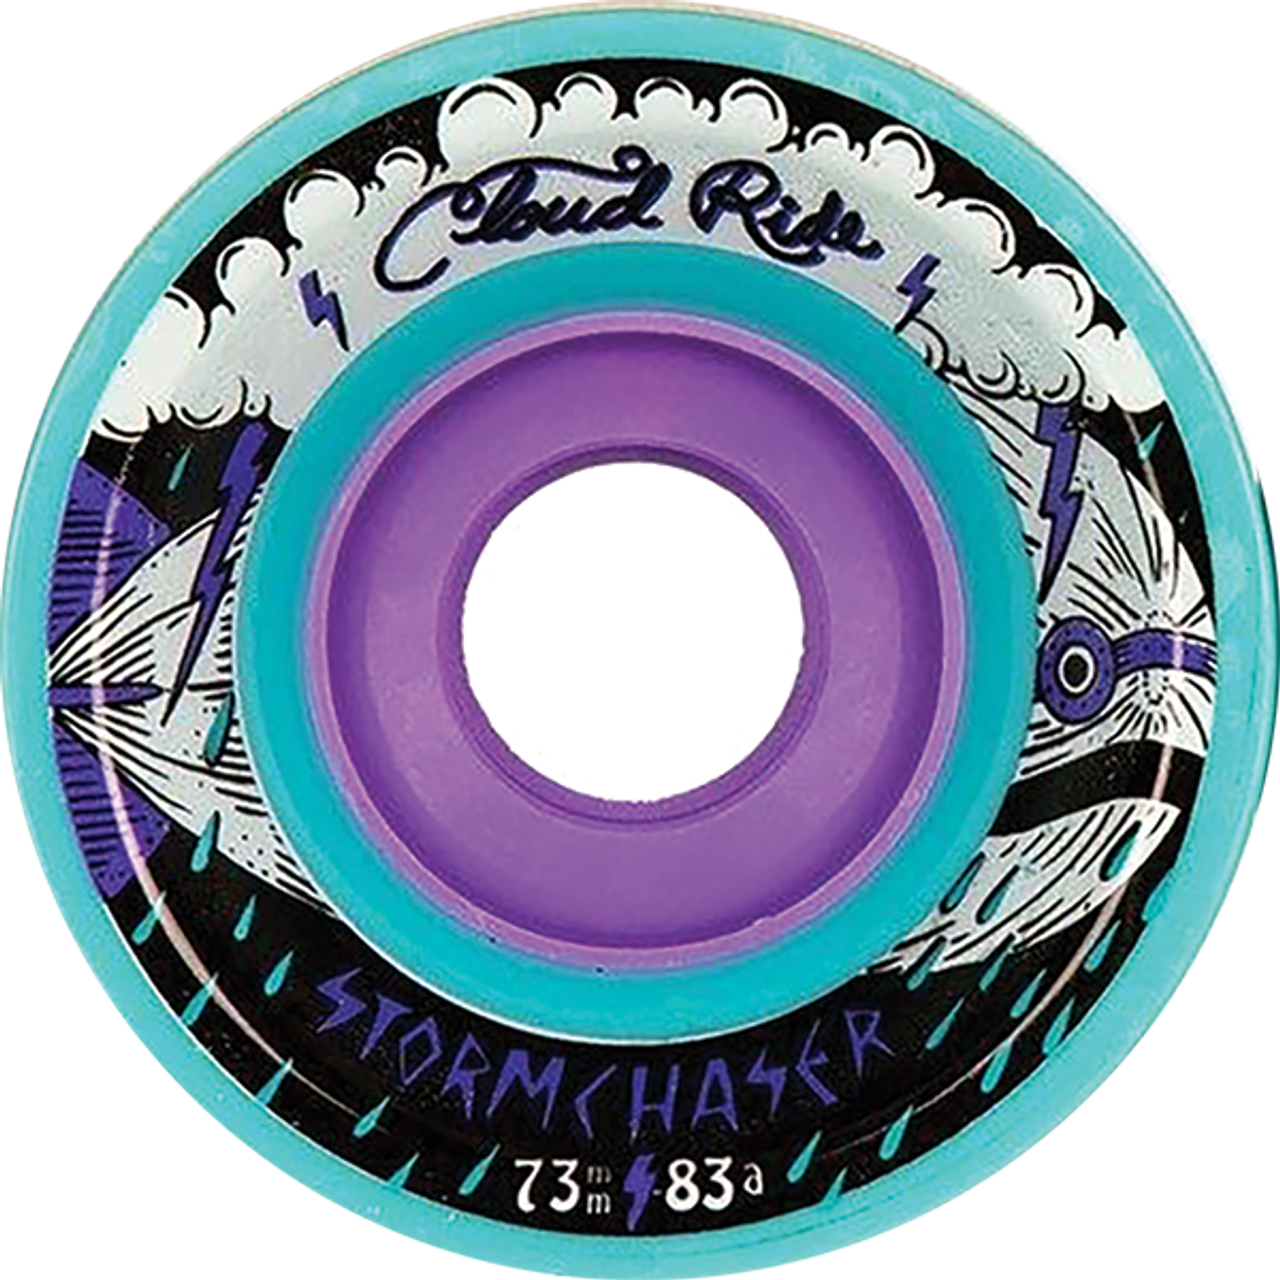 CLOUD RIDE! STORM CHASER 73mm 83a TURQUOISE WHEELS SET